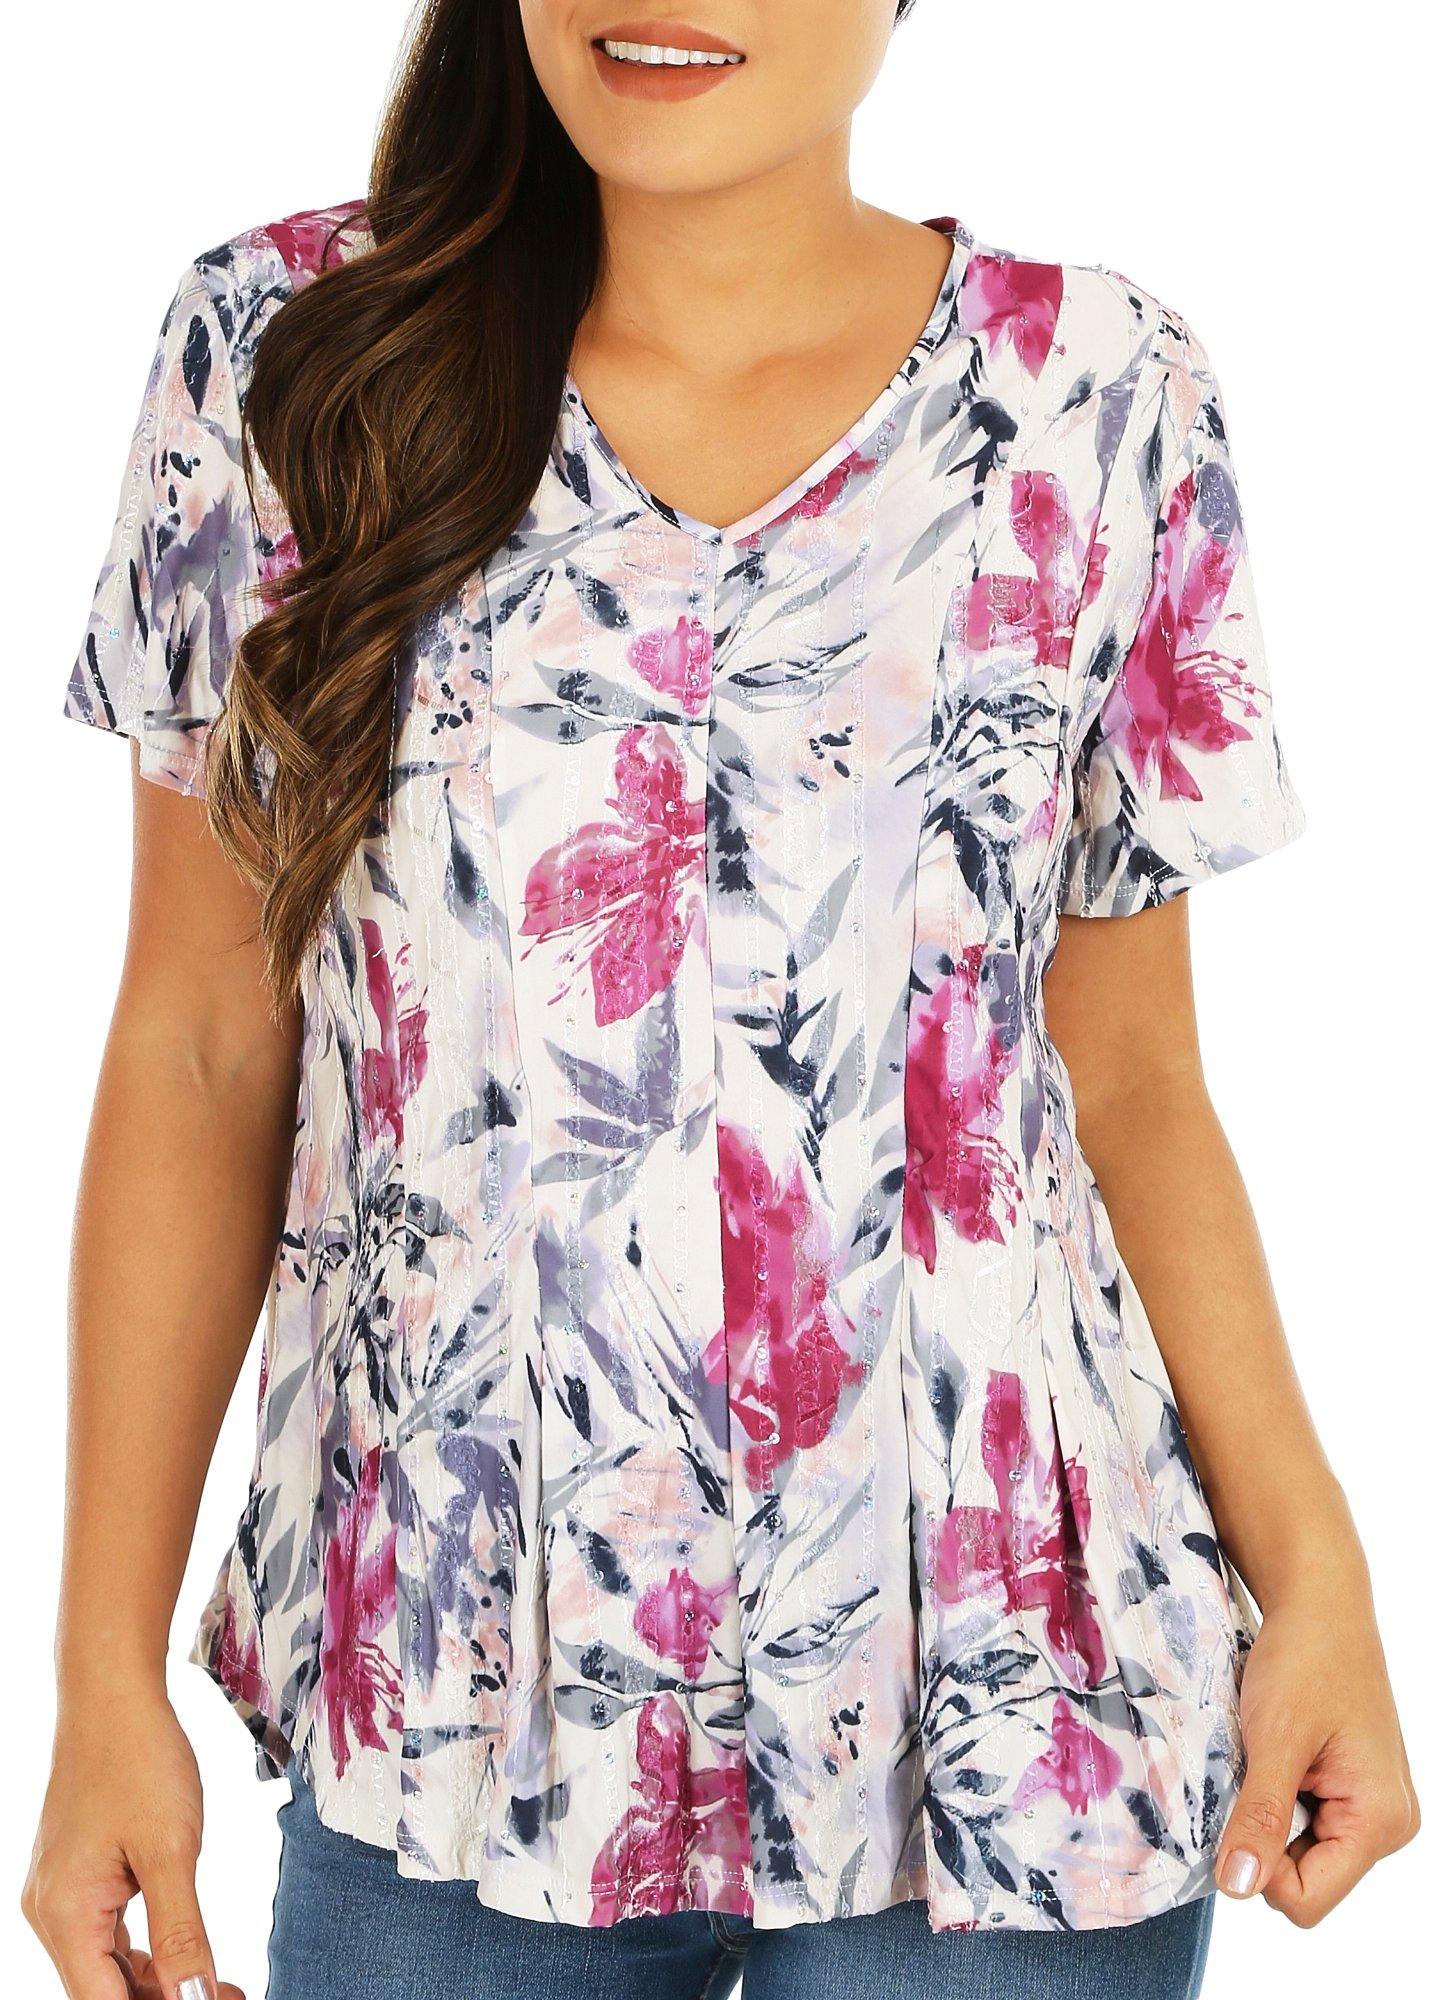 Coral Bay Womens Floral Embellished Pleated Short Sleeve Top